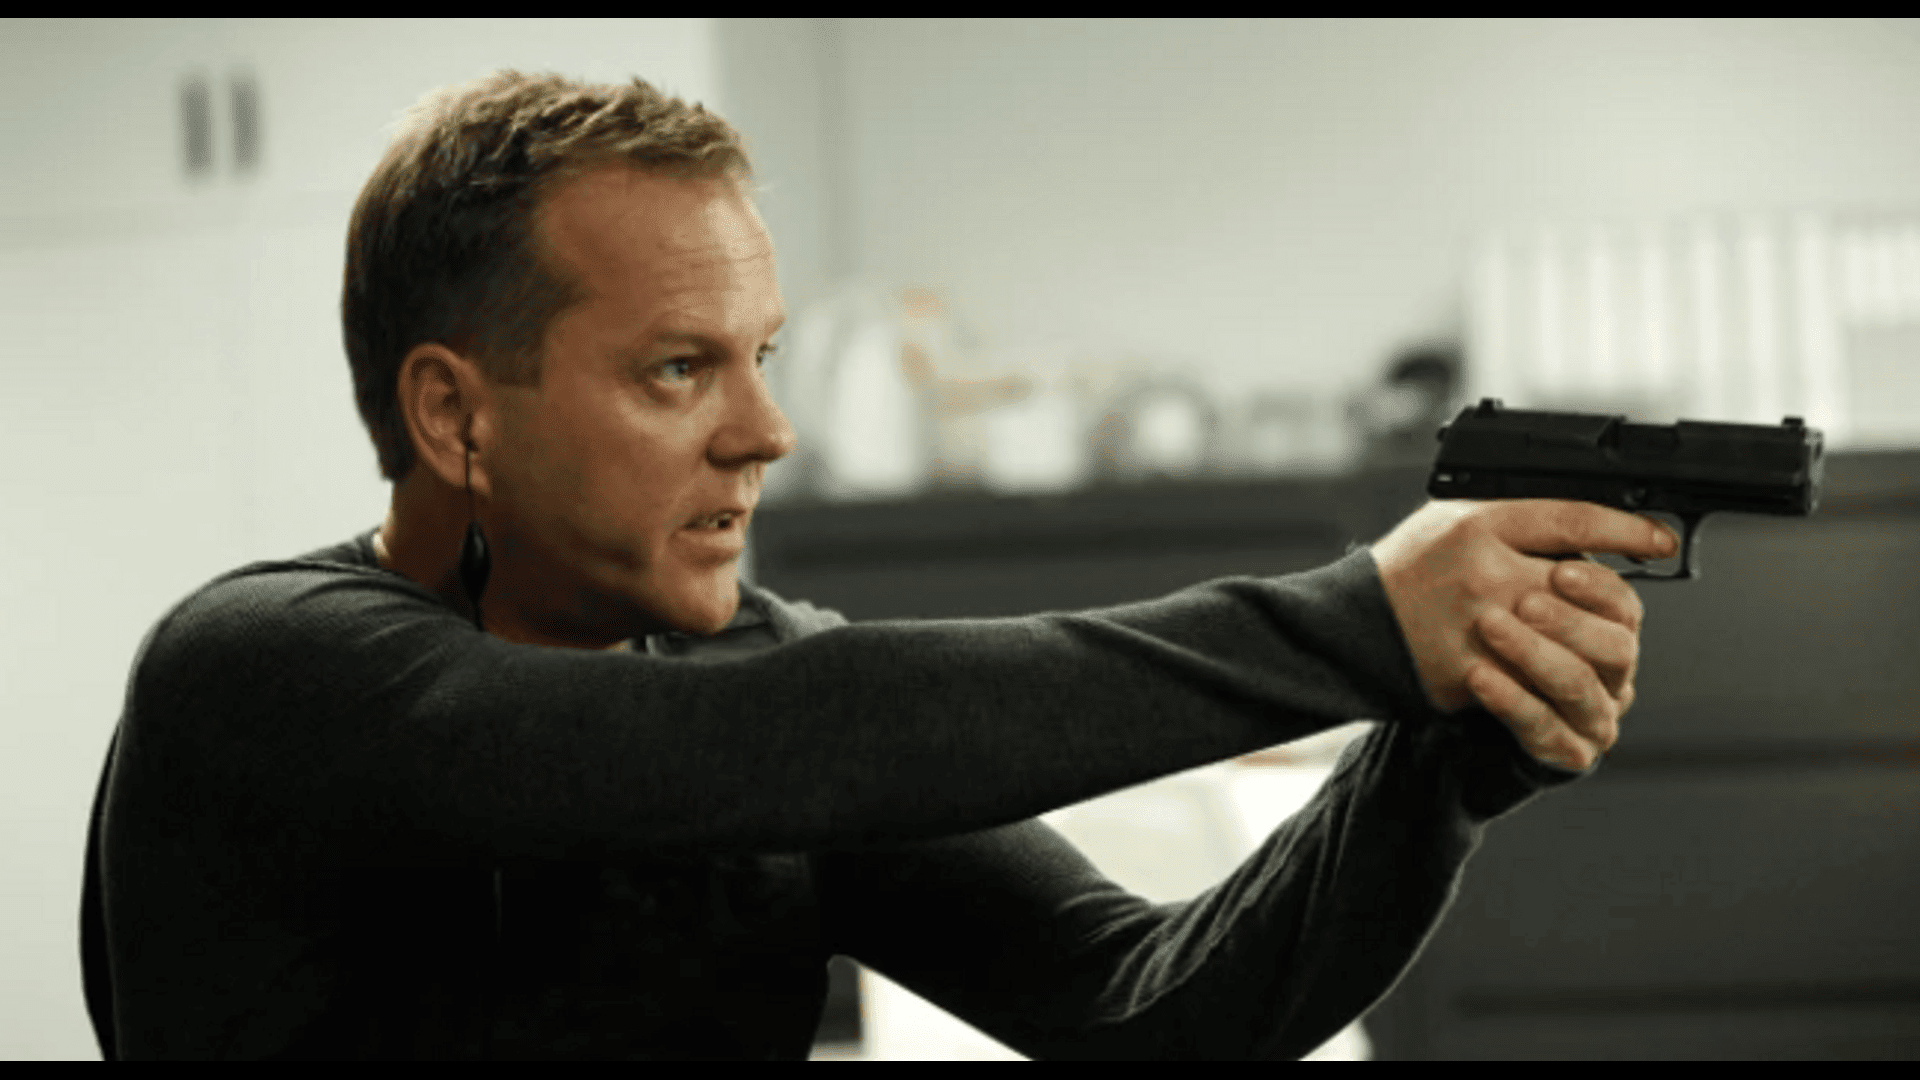 kiefer-sutherland-is-ready-to-return-as-jack-bauer